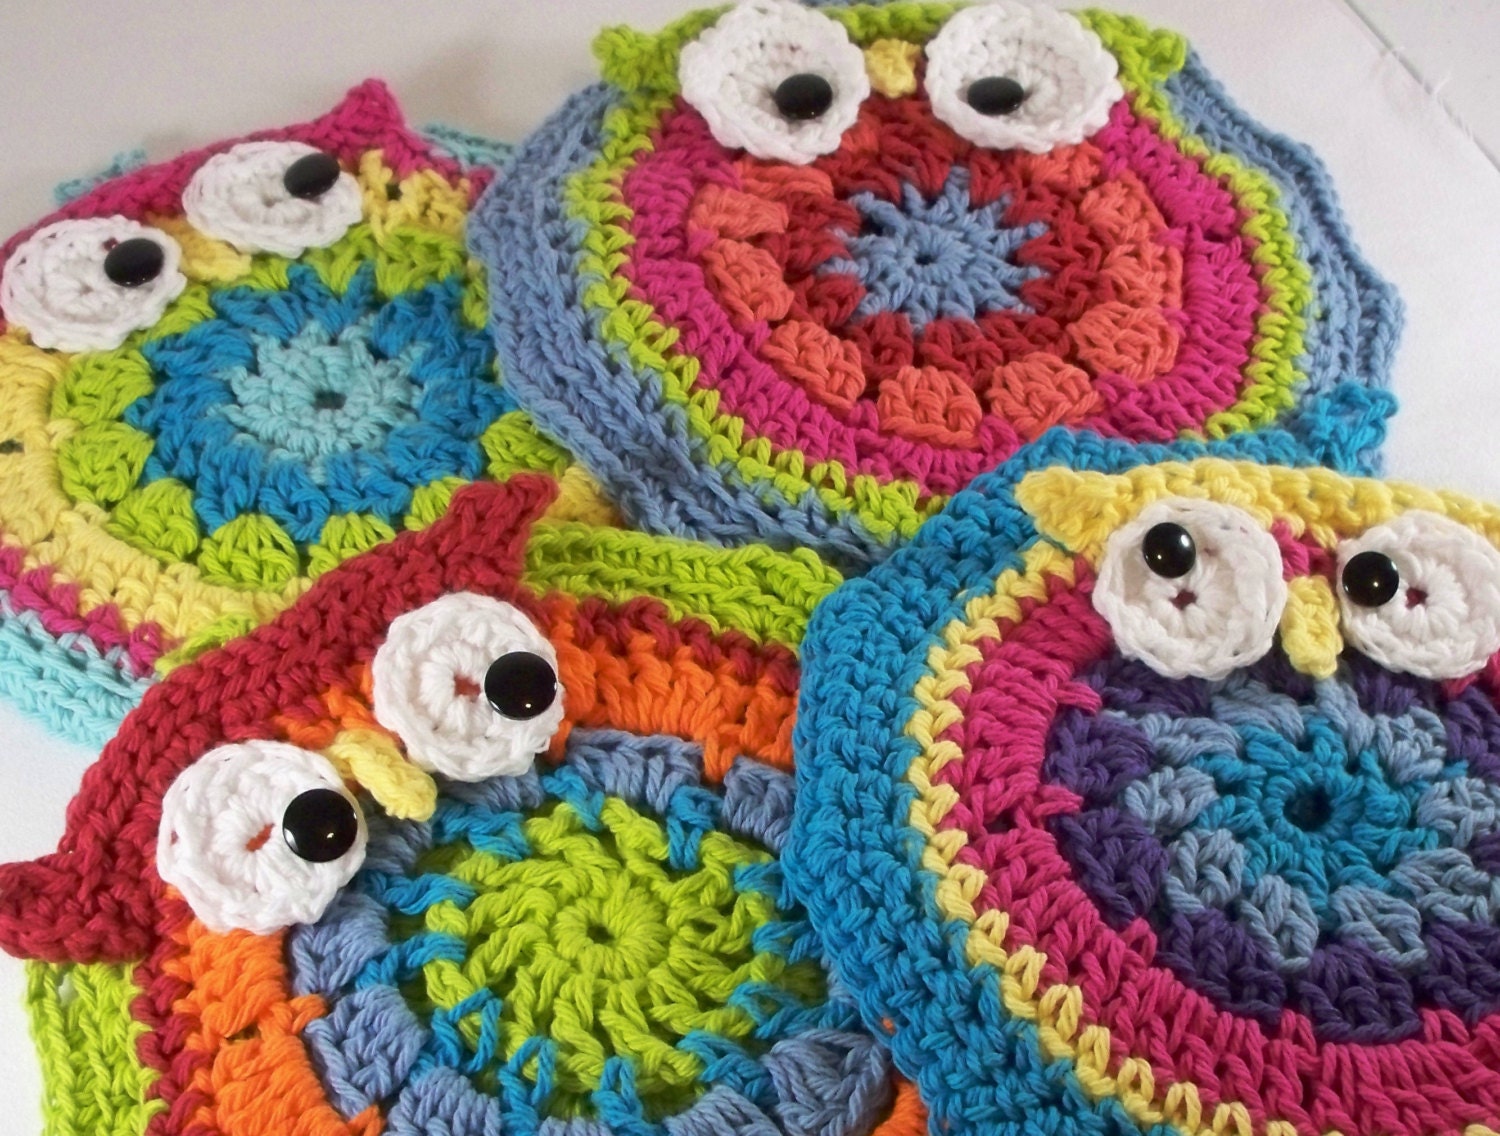 Owl Pot Holders Crochet Old Fashioned Unique by SewSoSweetStuff